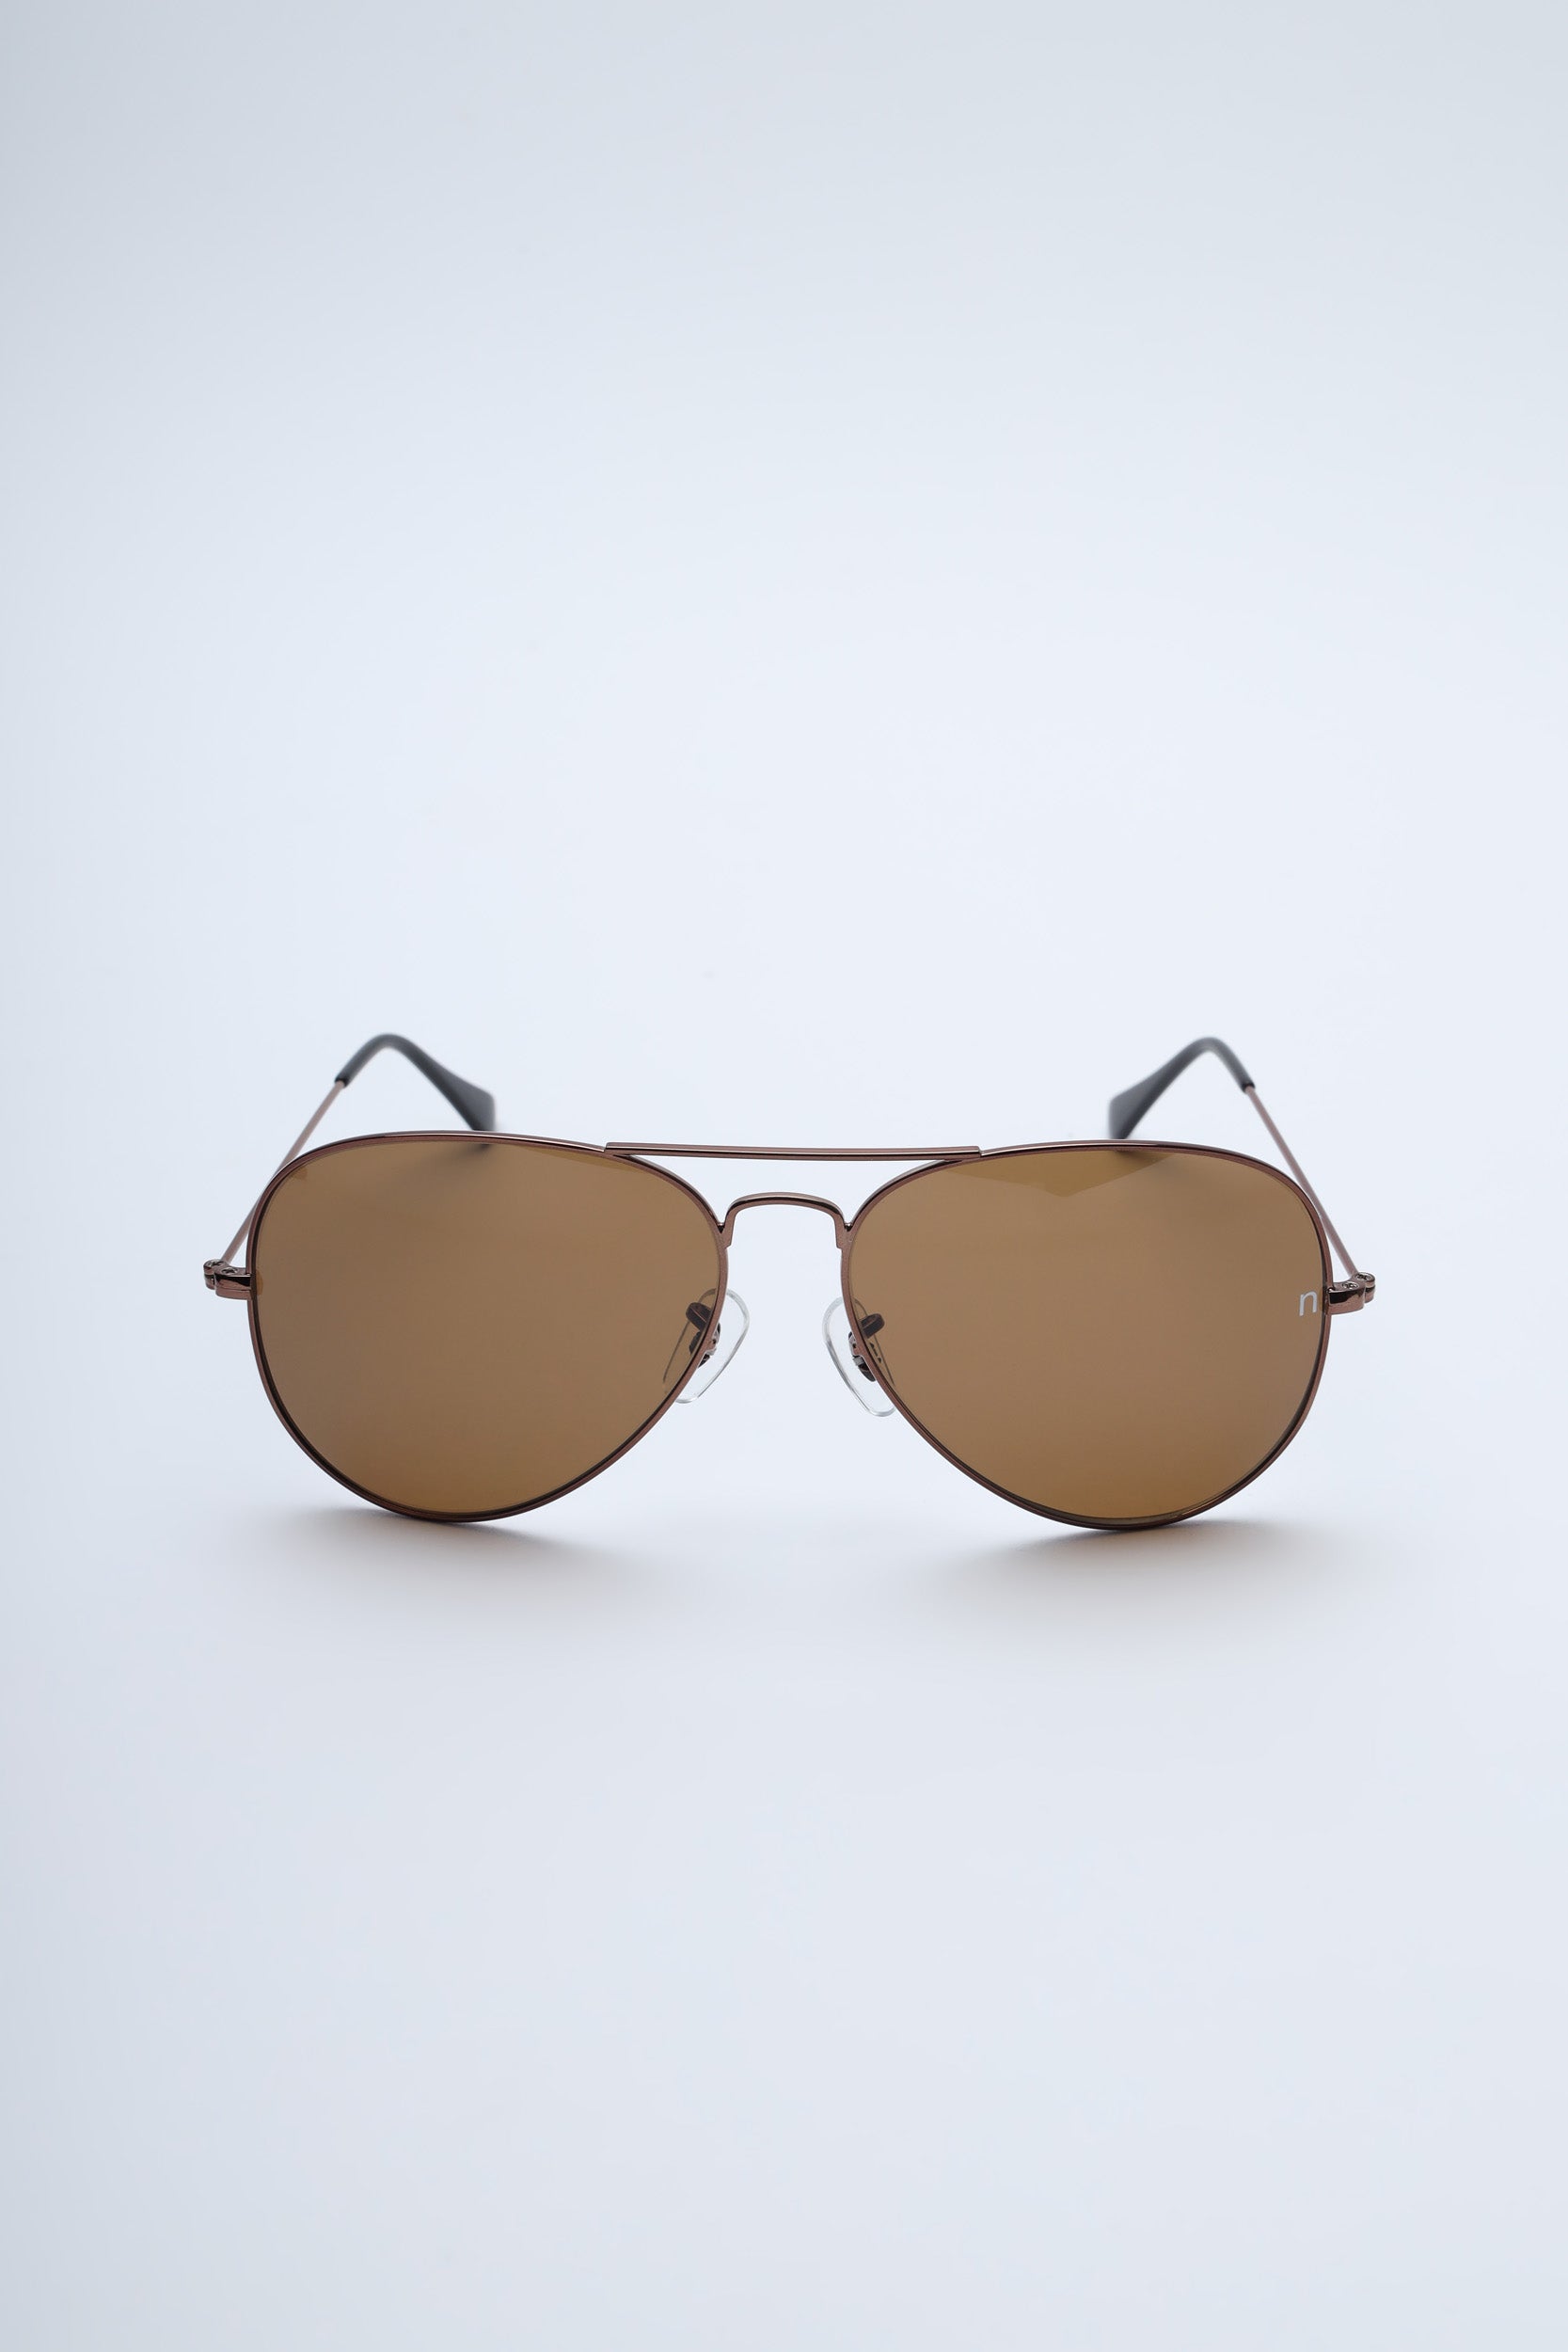 NS1001YFGL PC Brown Frame with Green Glass Lens Sunglasses